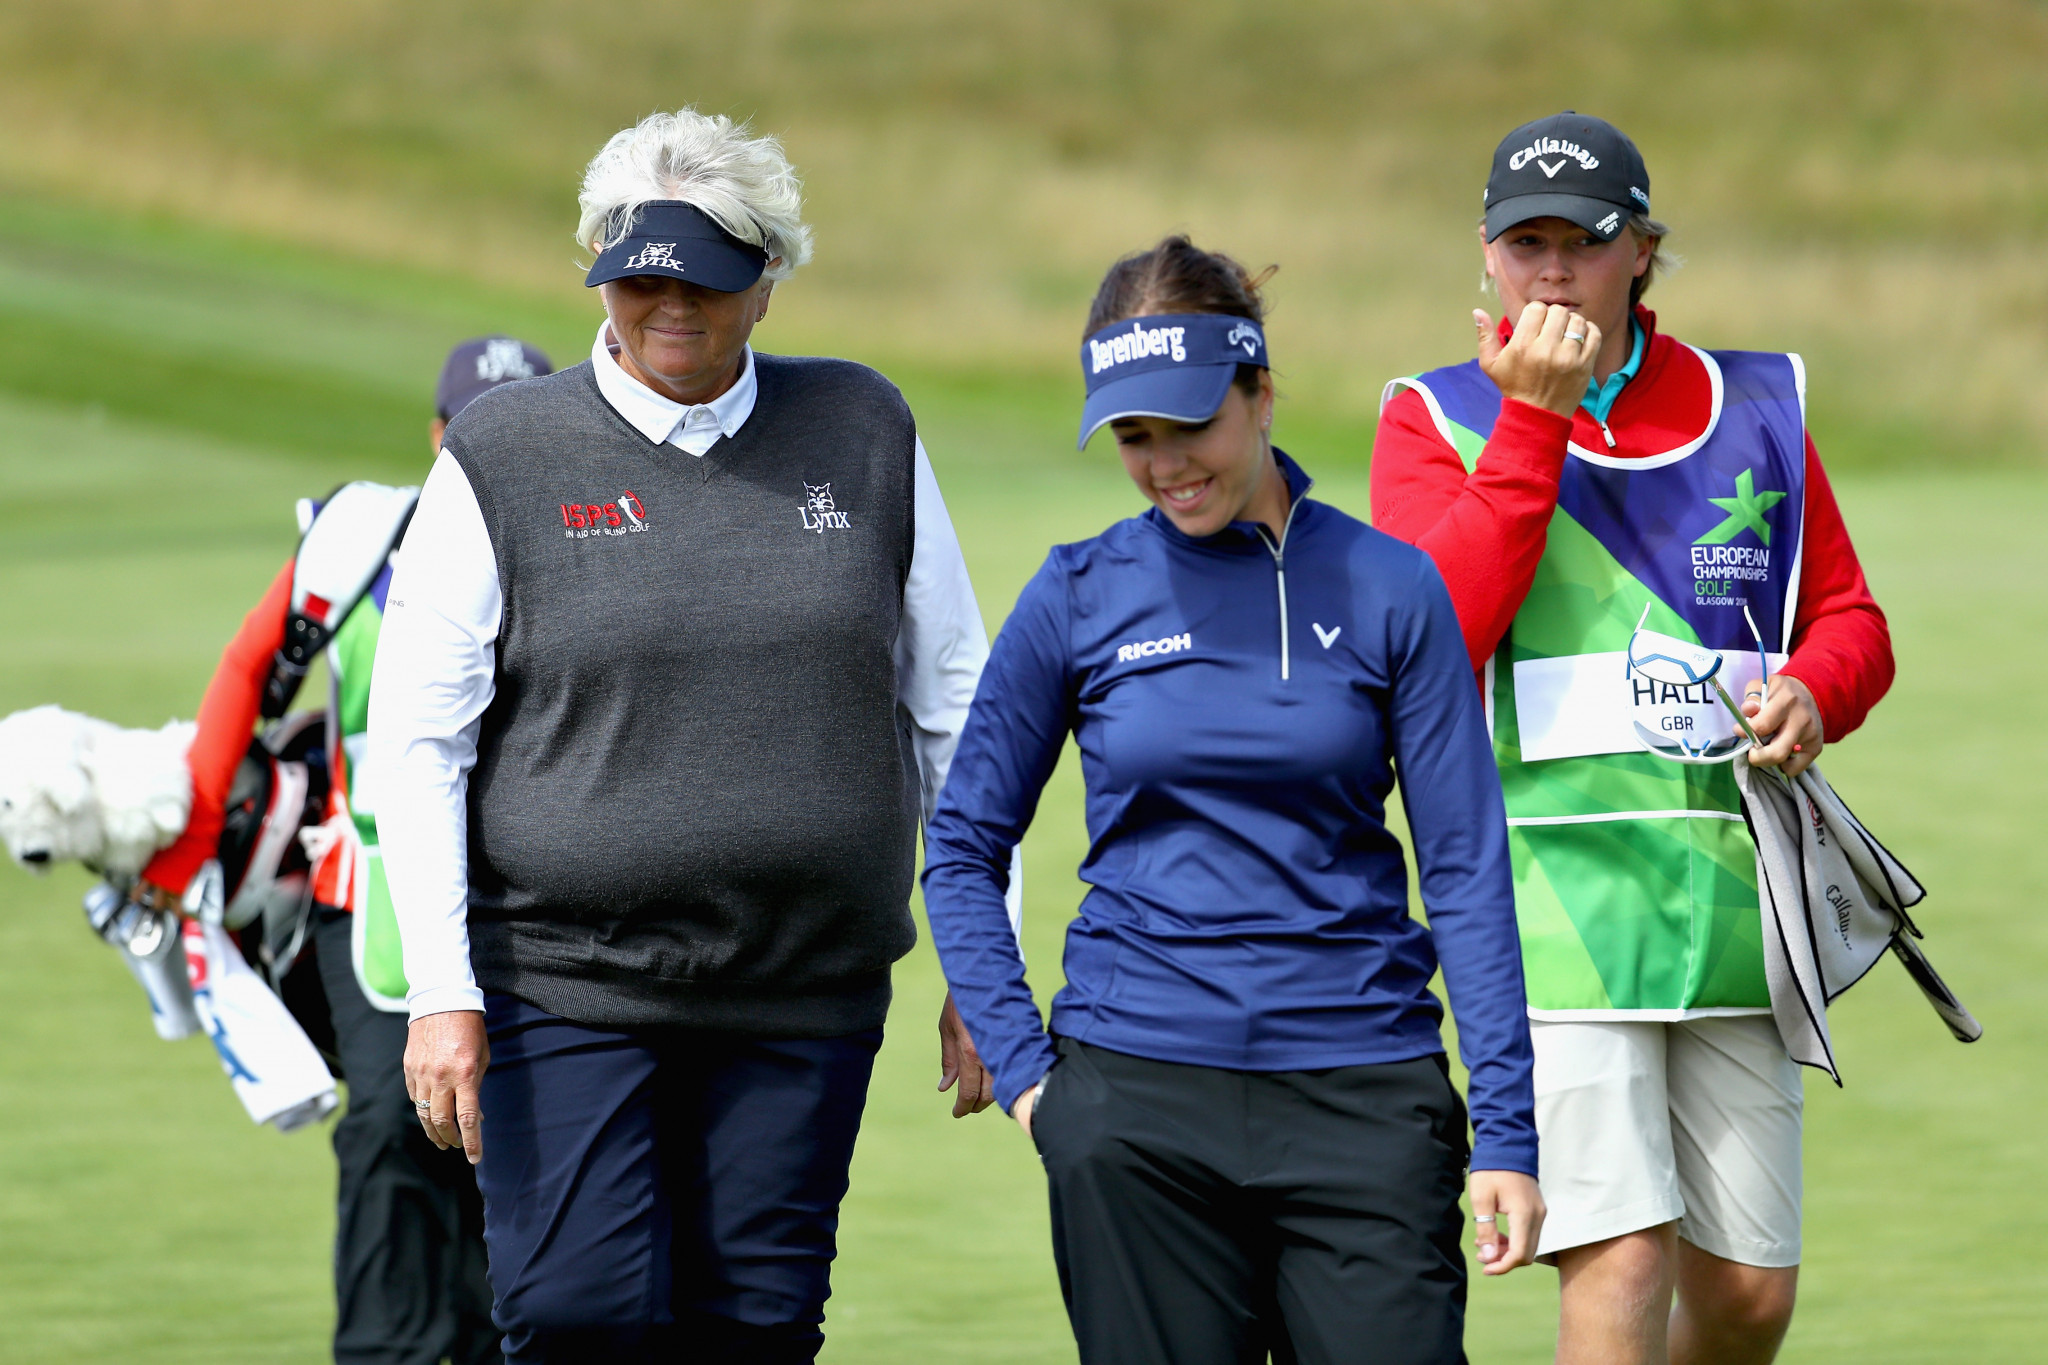 Georgia Hall and Laura Davies are among three British pairs in pole position to make the semi-finals after day two of the European Golf Team Championships at Gleneagles ©Getty Images